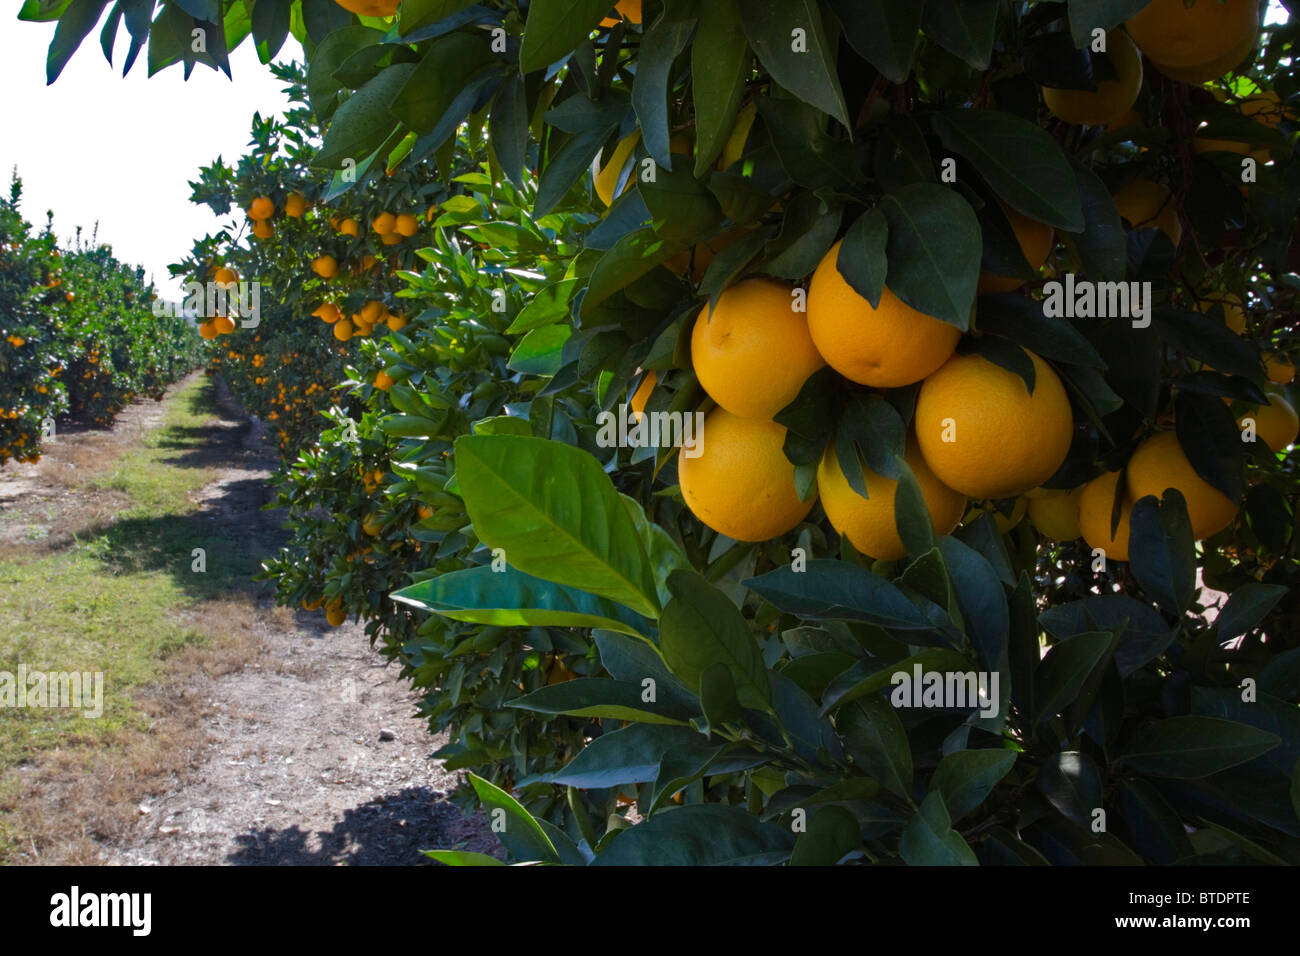 Clusters of oranges (Citrus sinensis) hanging from trees in an orchard Stock Photo